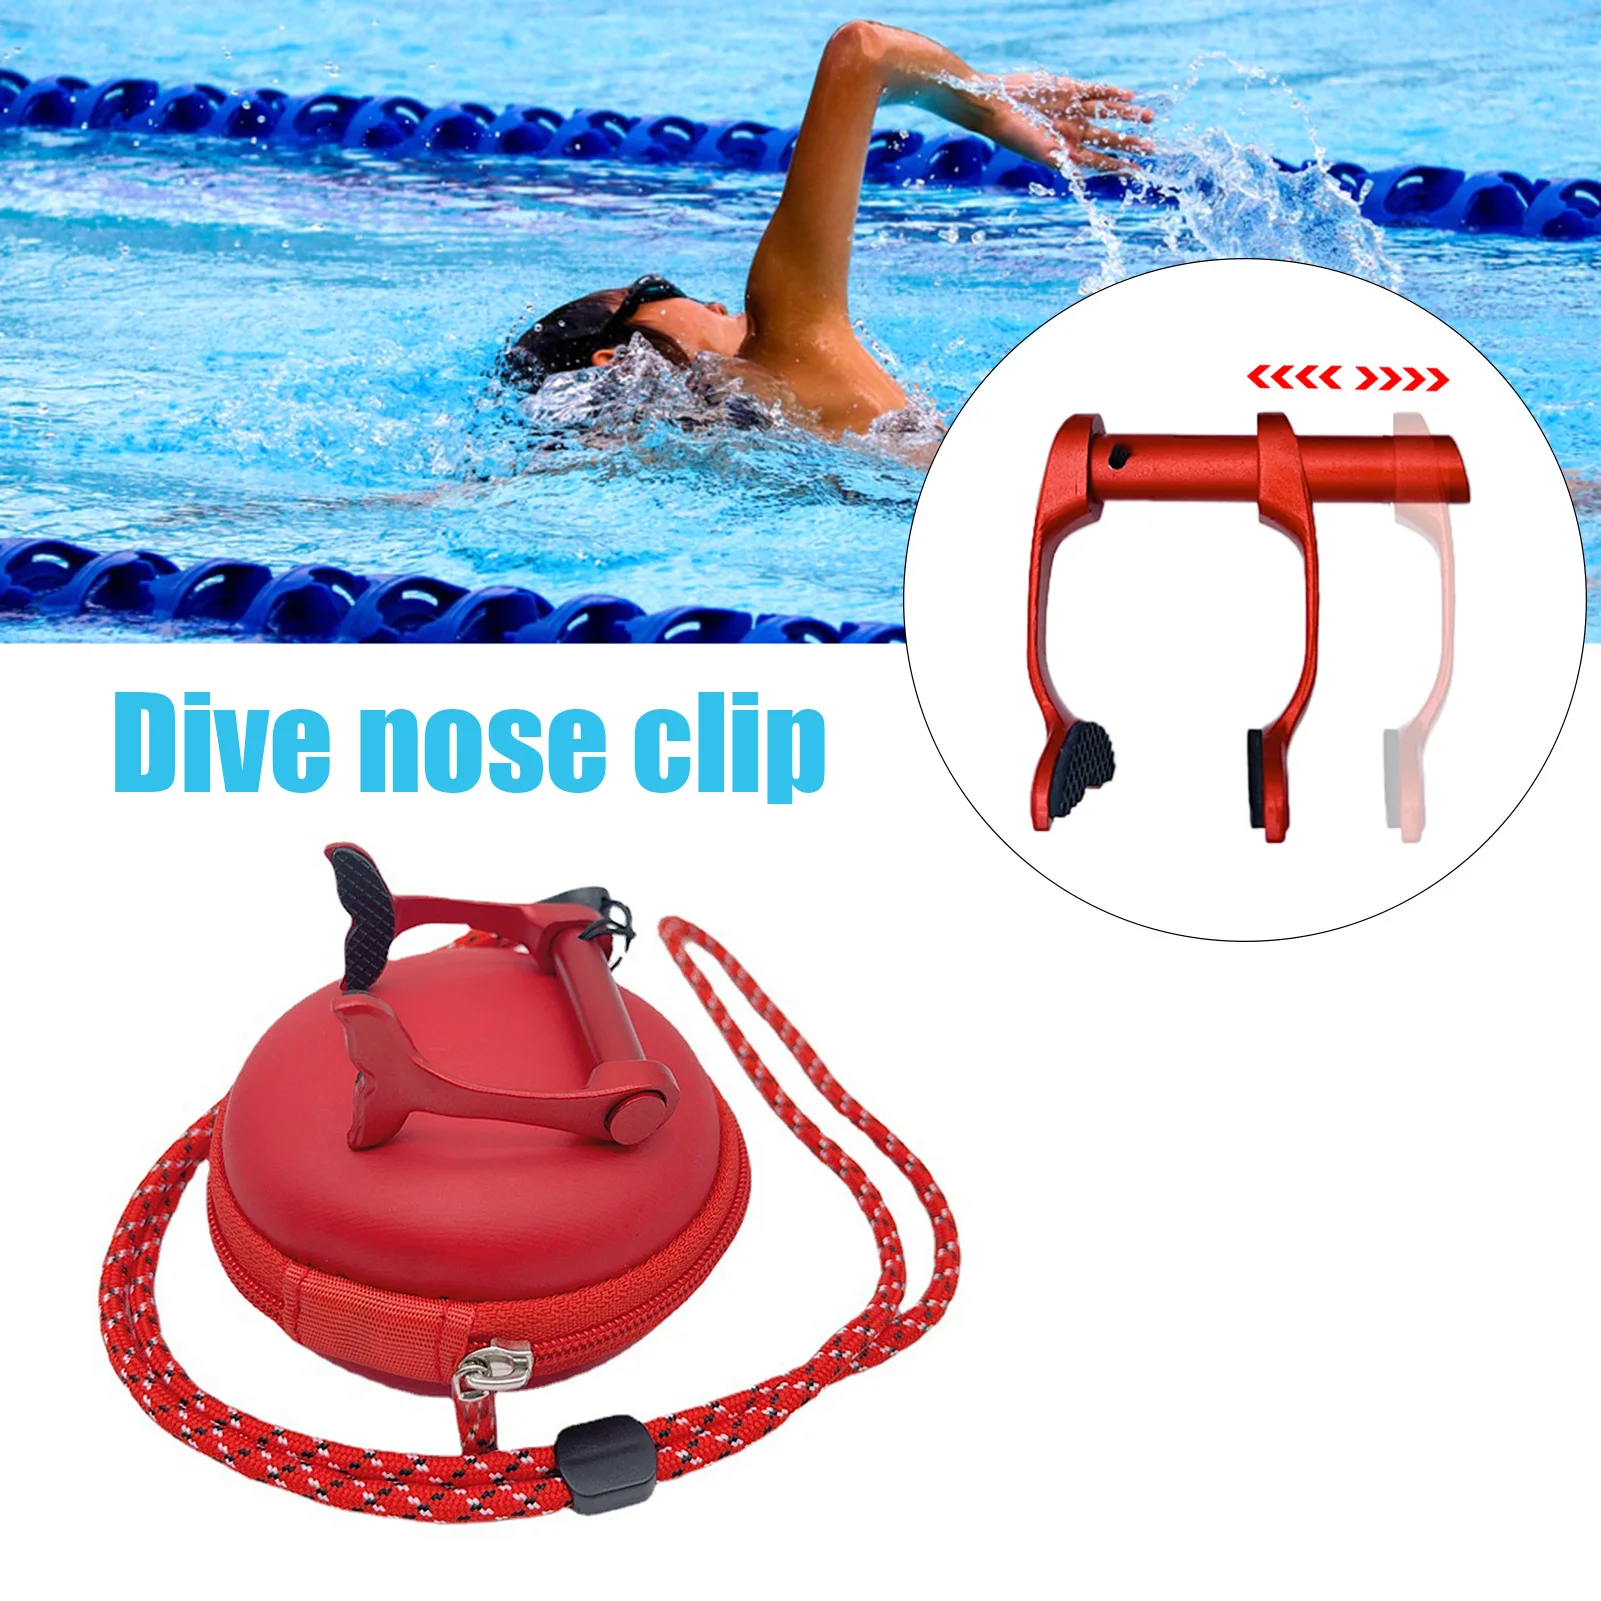 LYNN Swimming Nose Clip,Adult,Child,Silica Gel Non-Slip Surf Nose Clip,Spa Bathing Playing with Water Nose Protector Prevent Nose Drowning/Blue/Uniform Code 